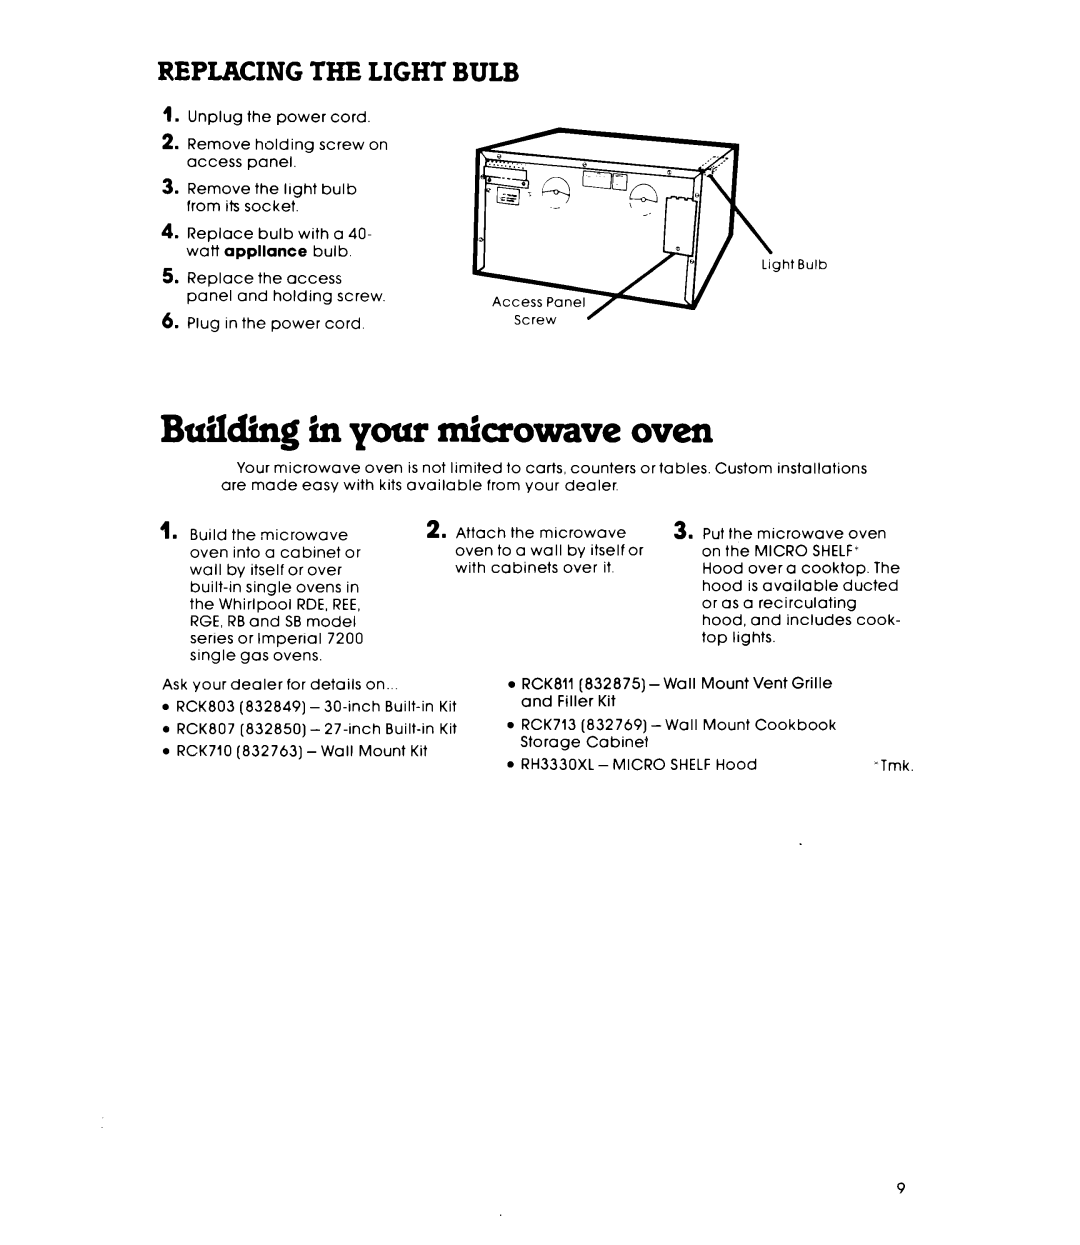 Whirlpool Mk8100W warranty Building in your miaowave oven, Replacing The Light Bulb 